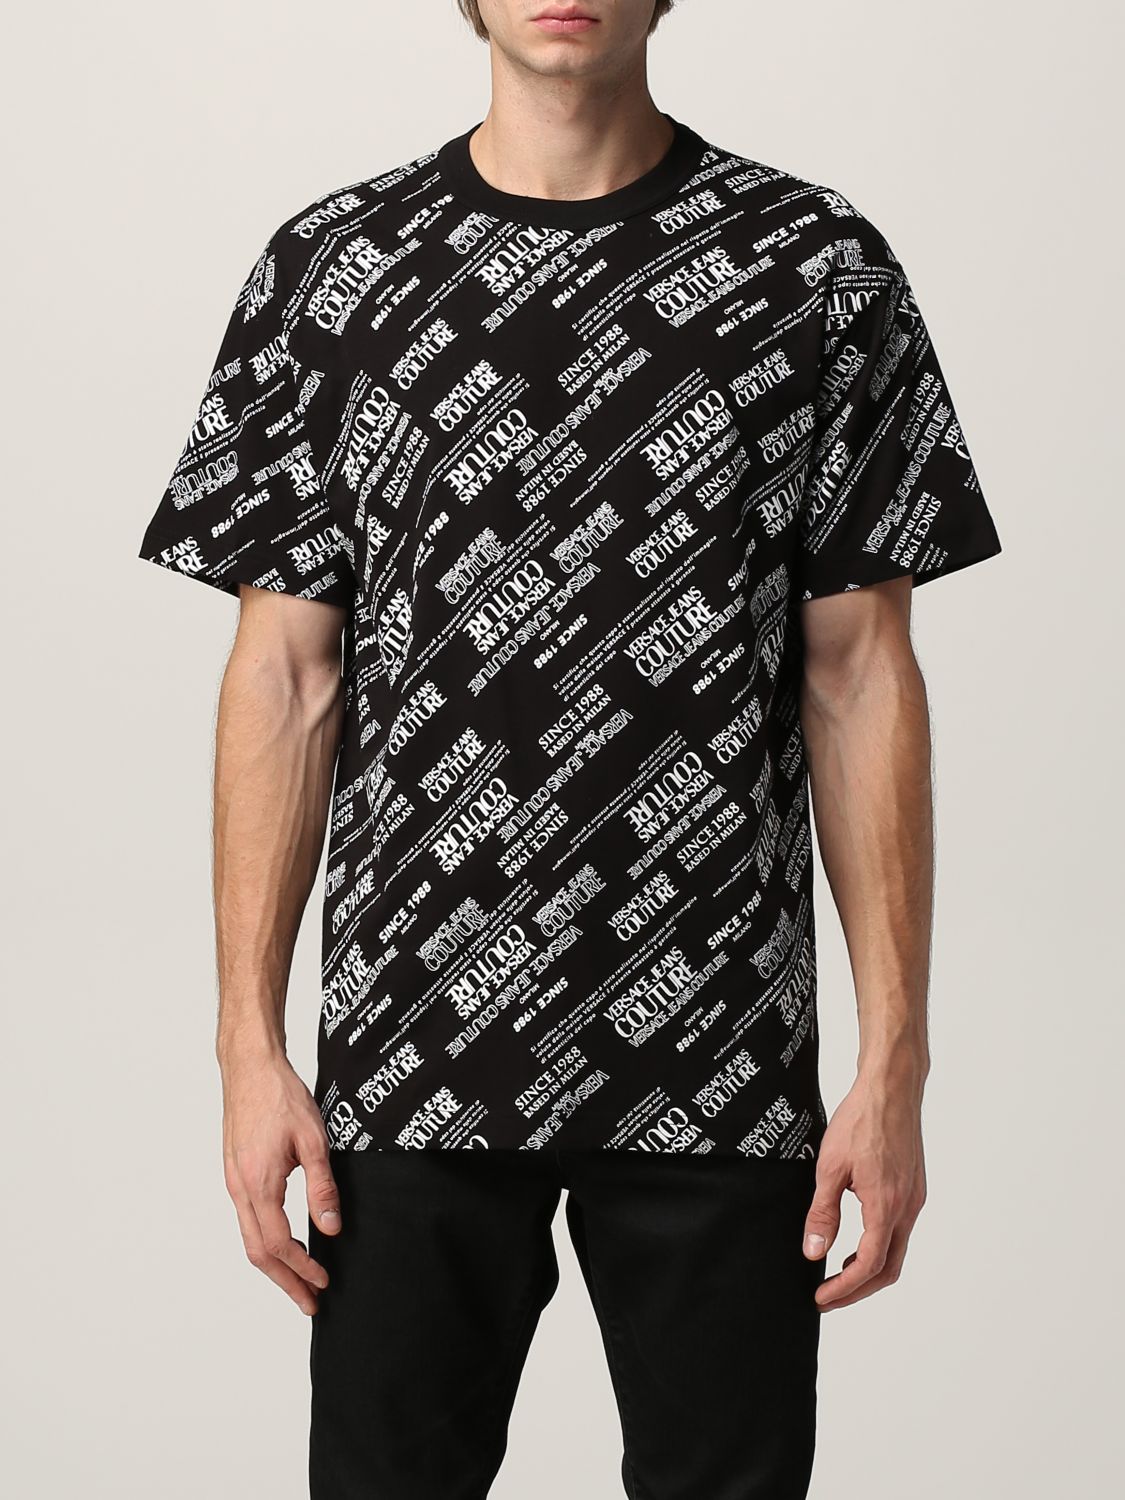 VERSACE JEANS COUTURE: T-shirt with all over logo - Black | Versace ...